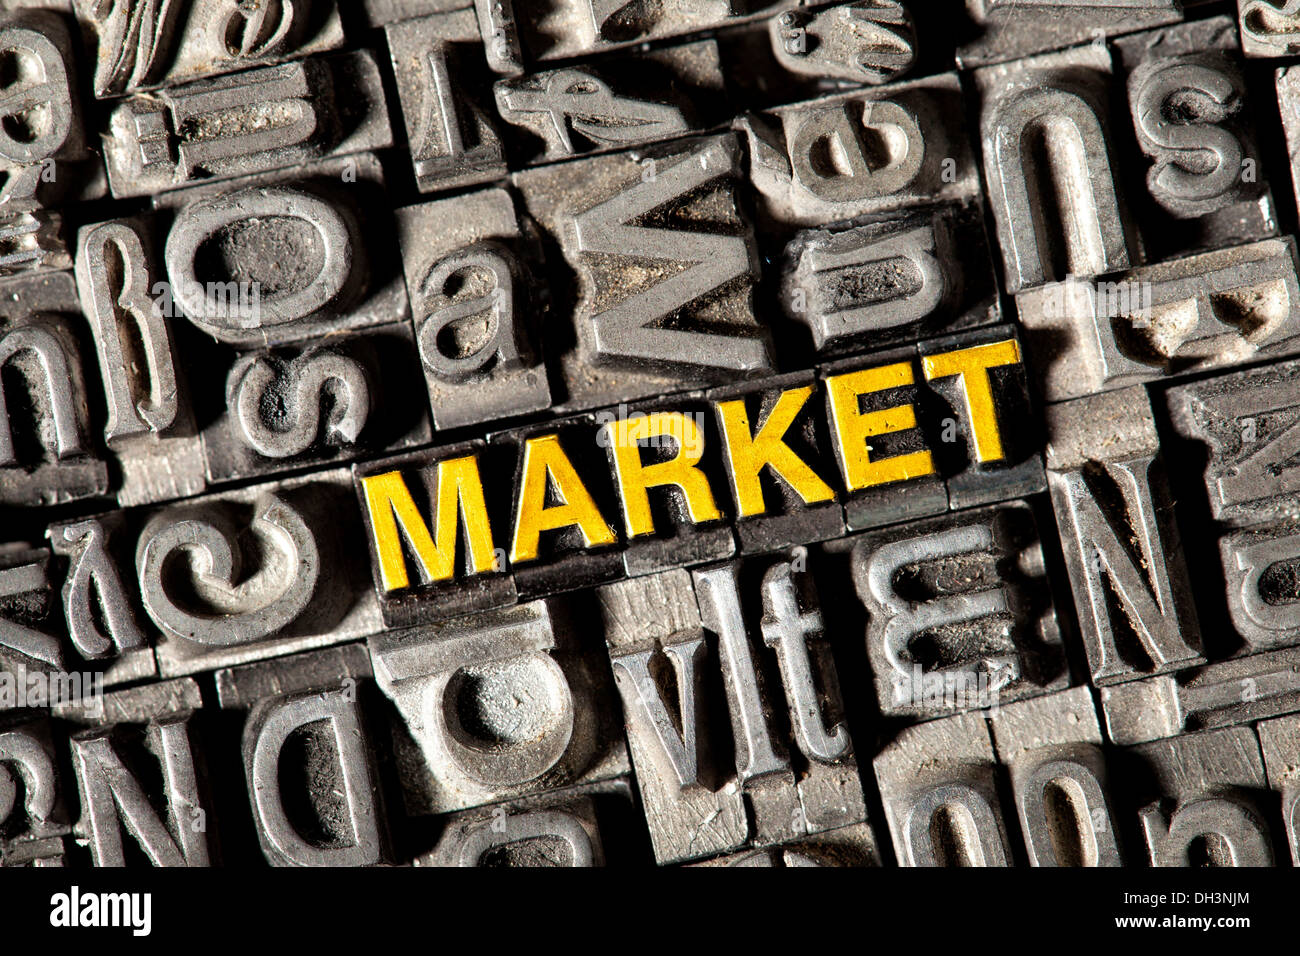 Old lead letters forming the word 'MARKET' Stock Photo